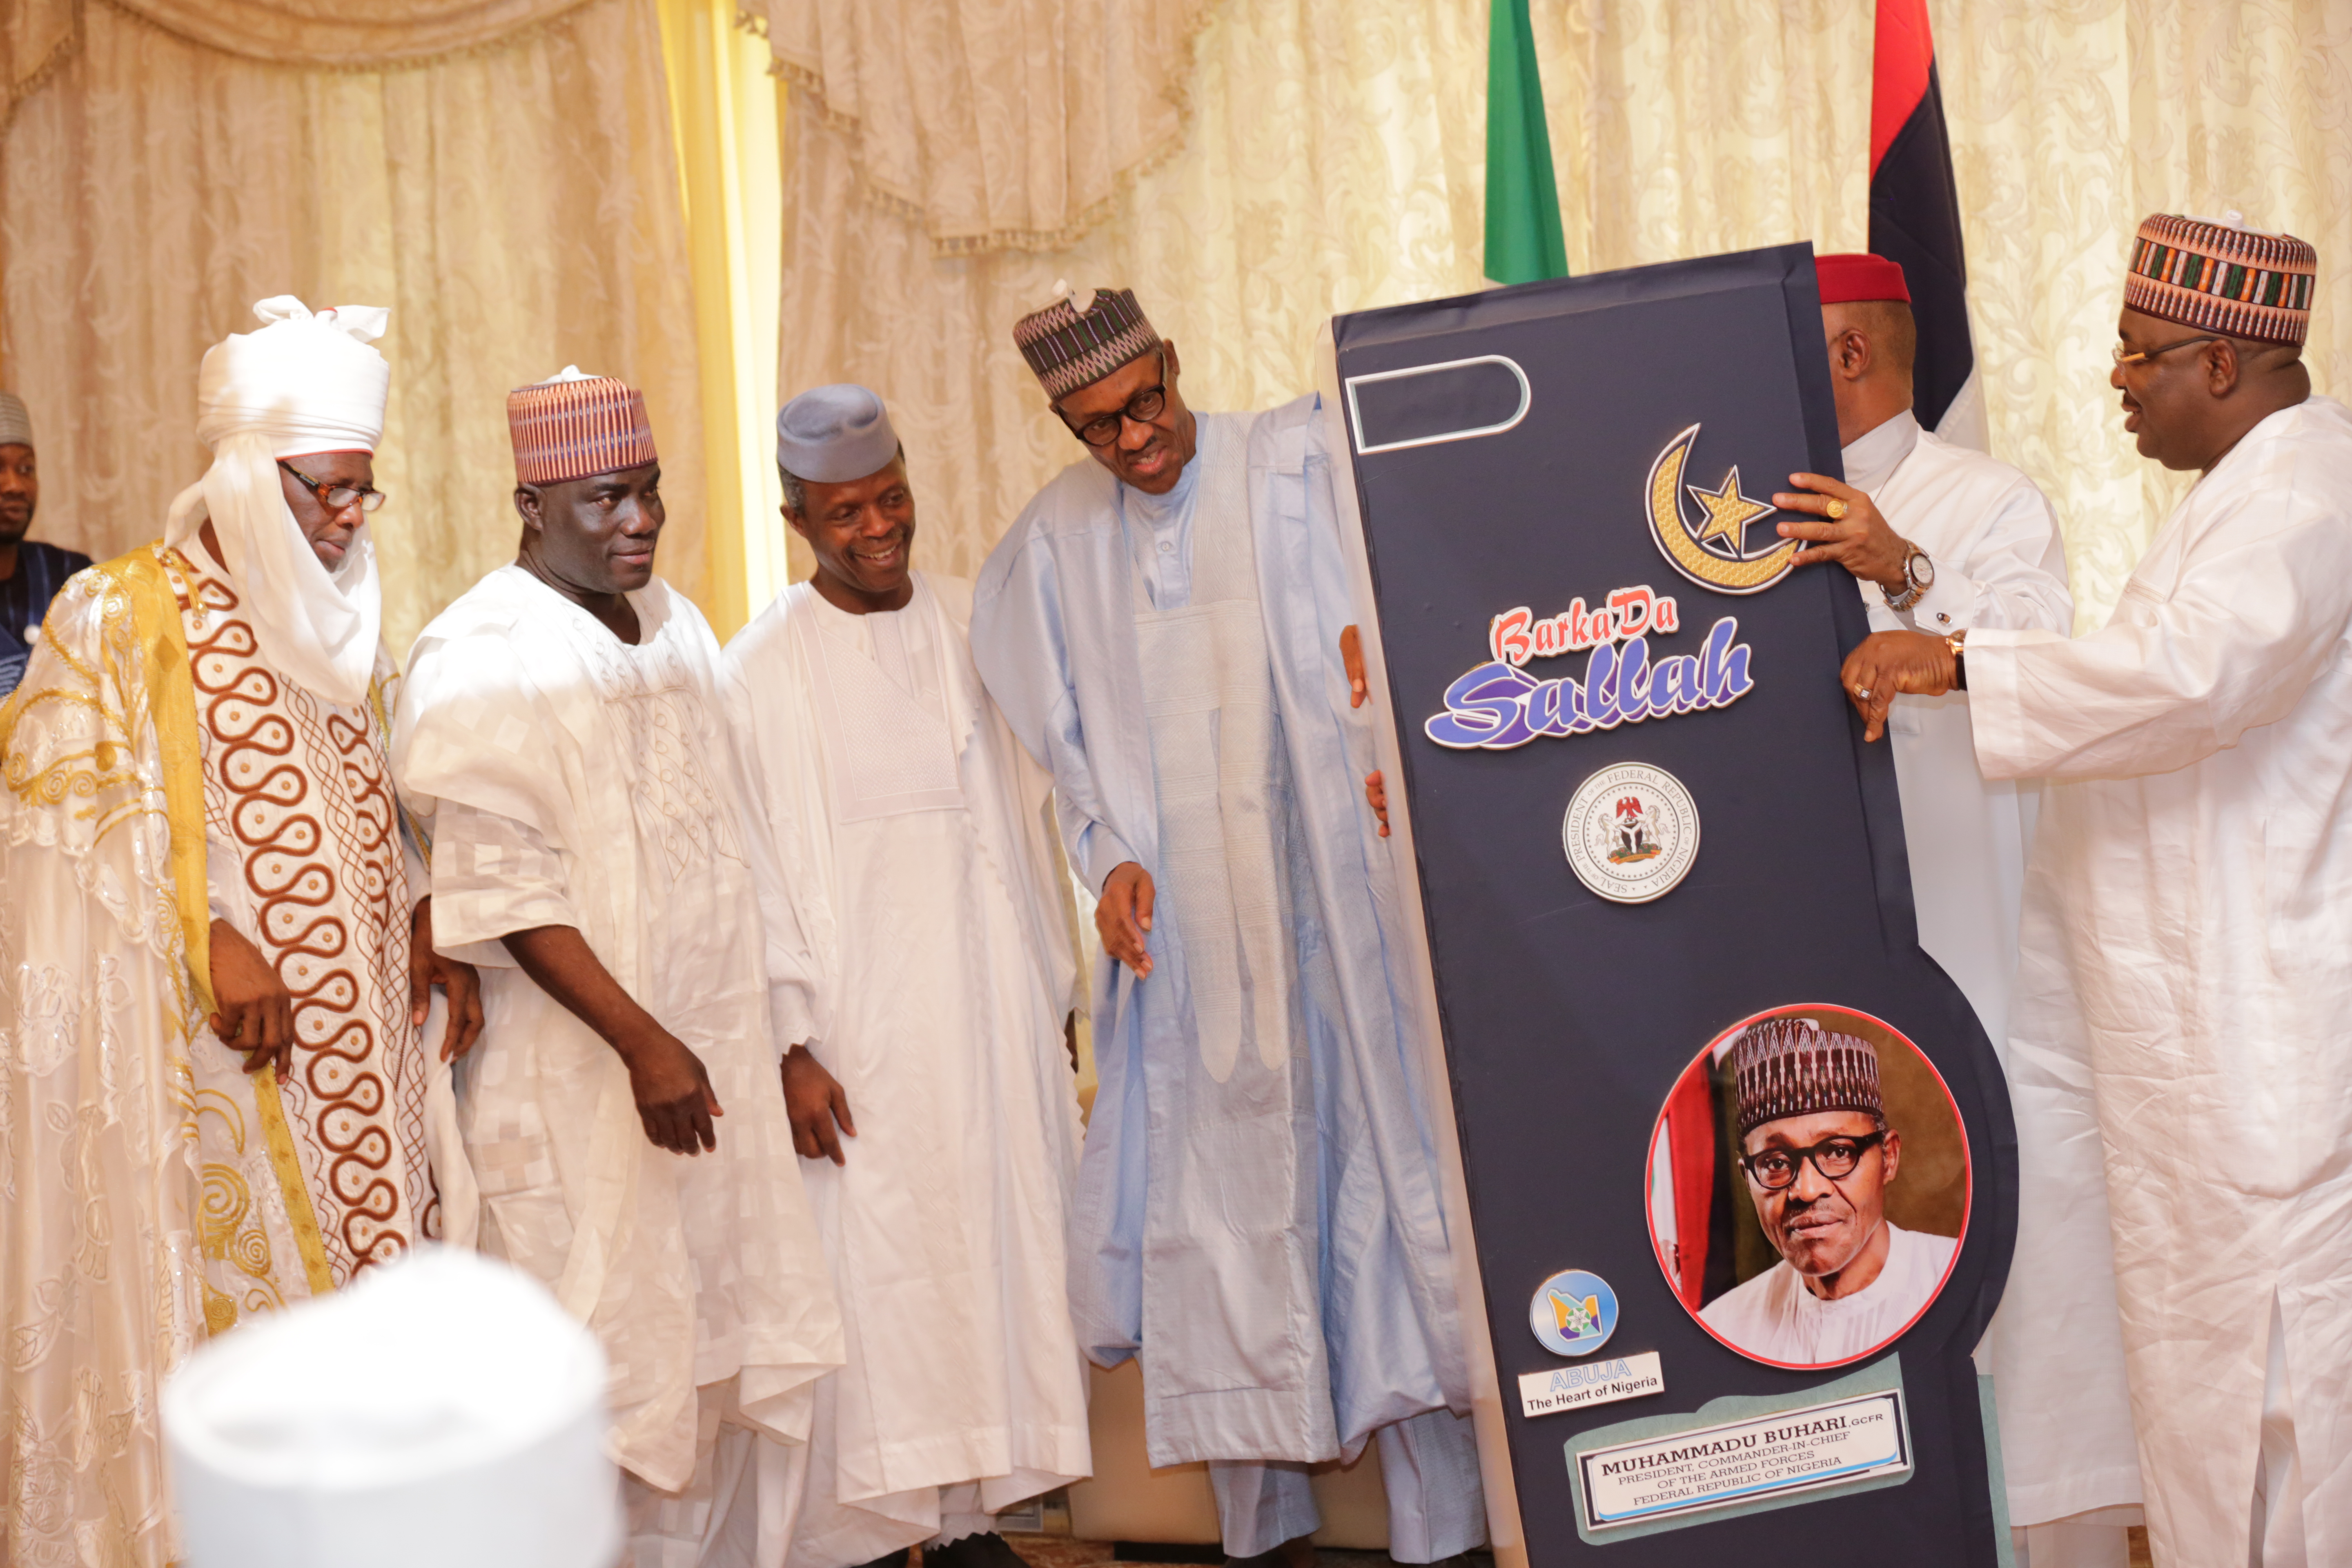 VP Osinbajo Joins President Buhari And Others In The Sallah Celebration On 17/07/2015